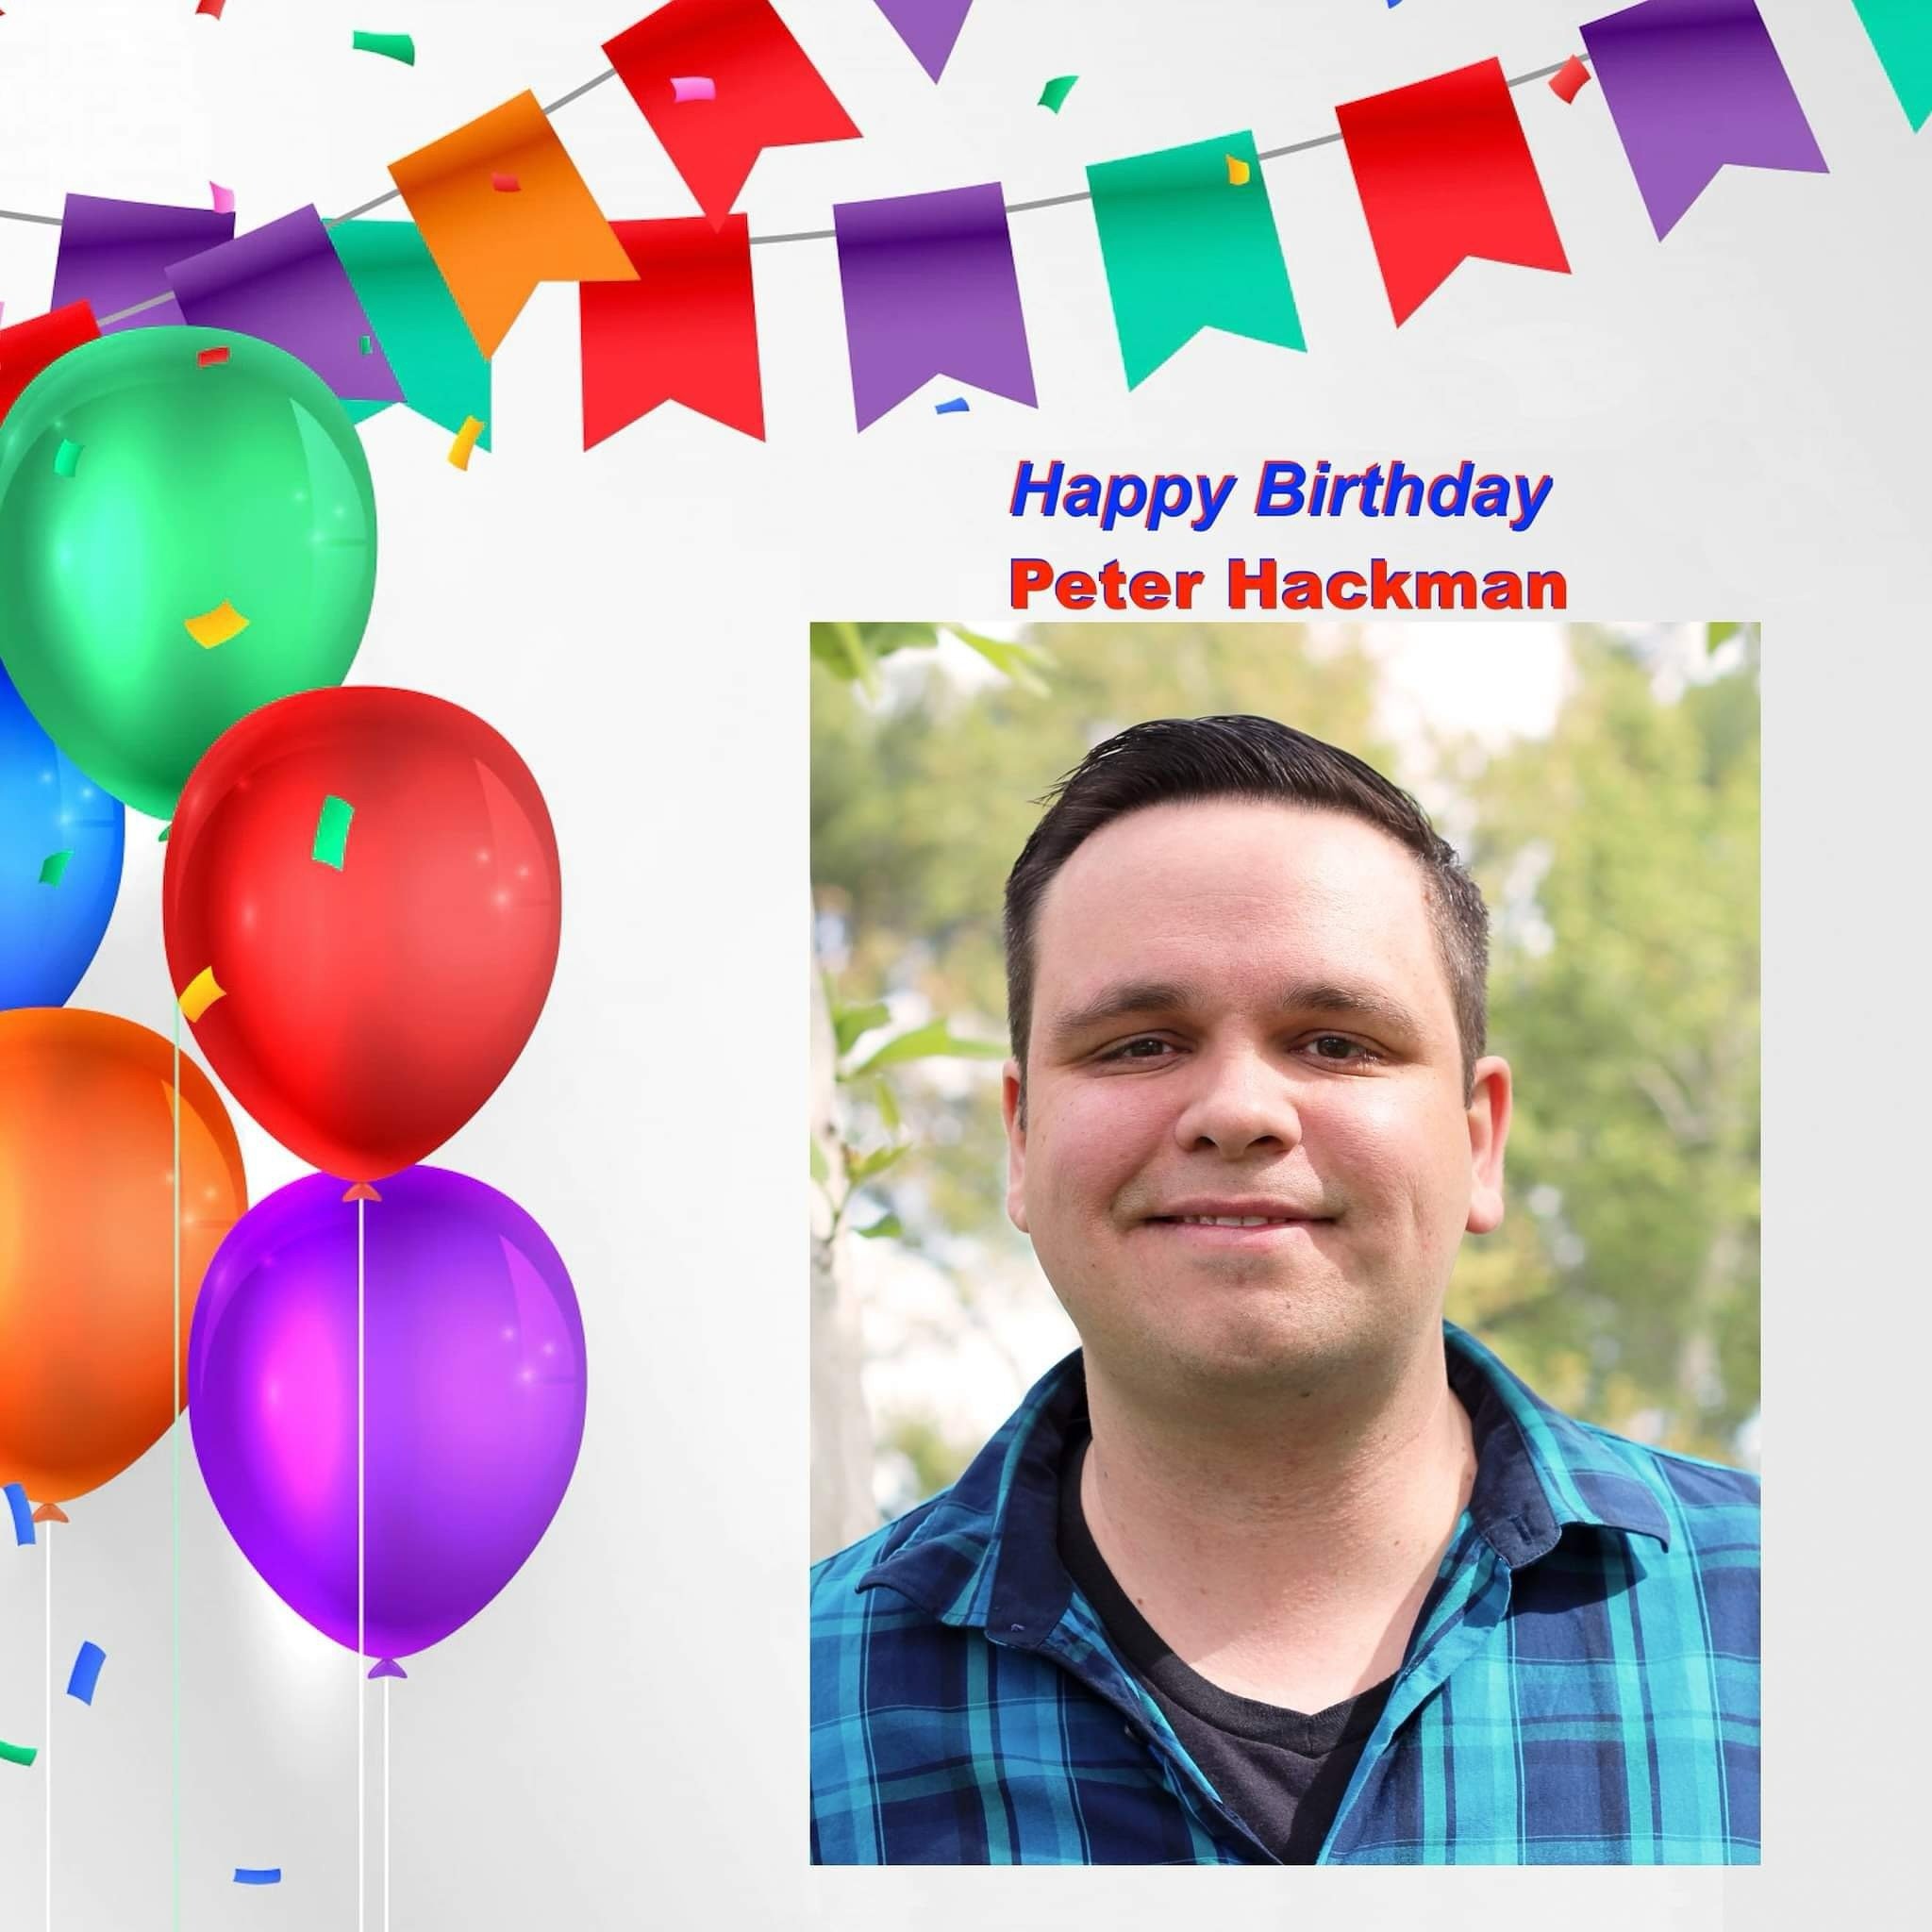 Please help us wish our final April 11th birthday trifecta, manager at DD MGMT Peter Hackman, a happy birthday! @pjhackman is also the President &amp; Founder of The @fansoffilmmusic Society.

www.differentdirectionmgmt.com
www.fansoffilmmusic.com